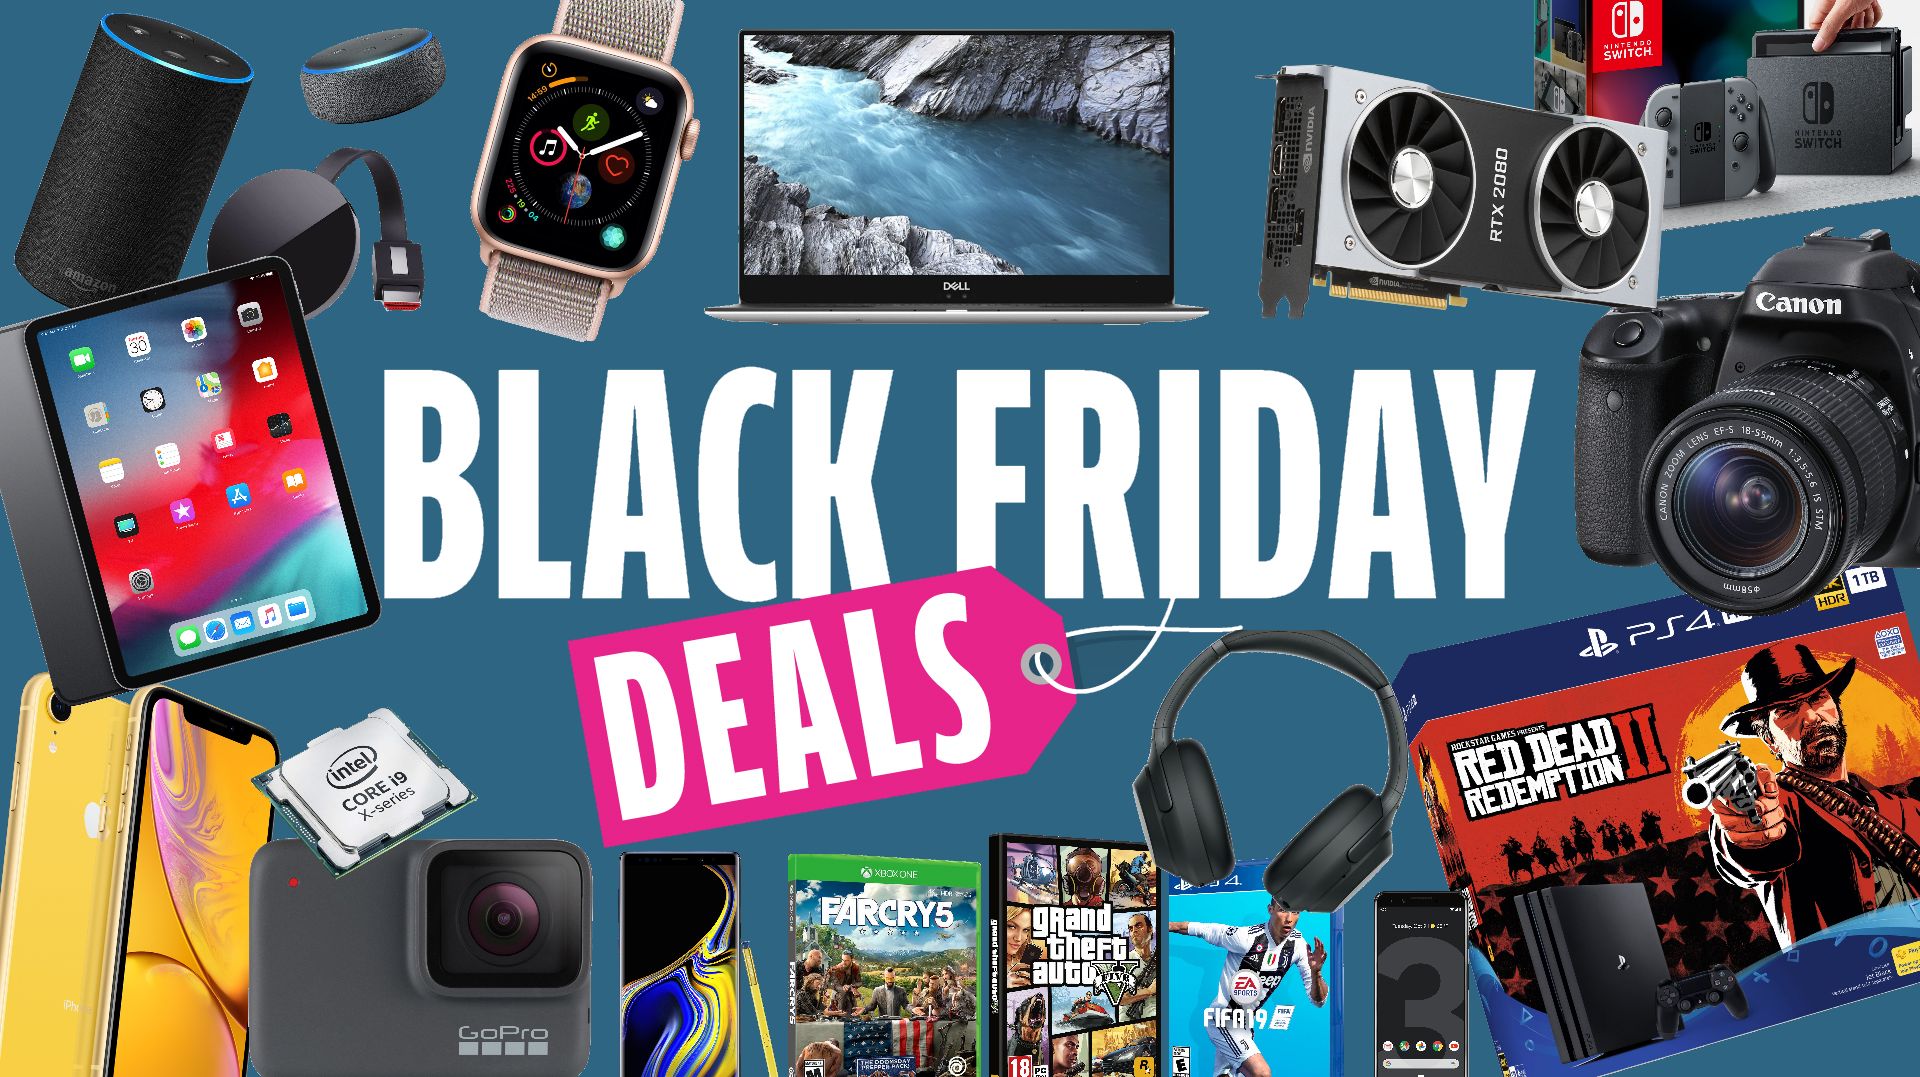 TVs, Laptops, Home Theater and More are in Best Buy Black Friday Deals 2019